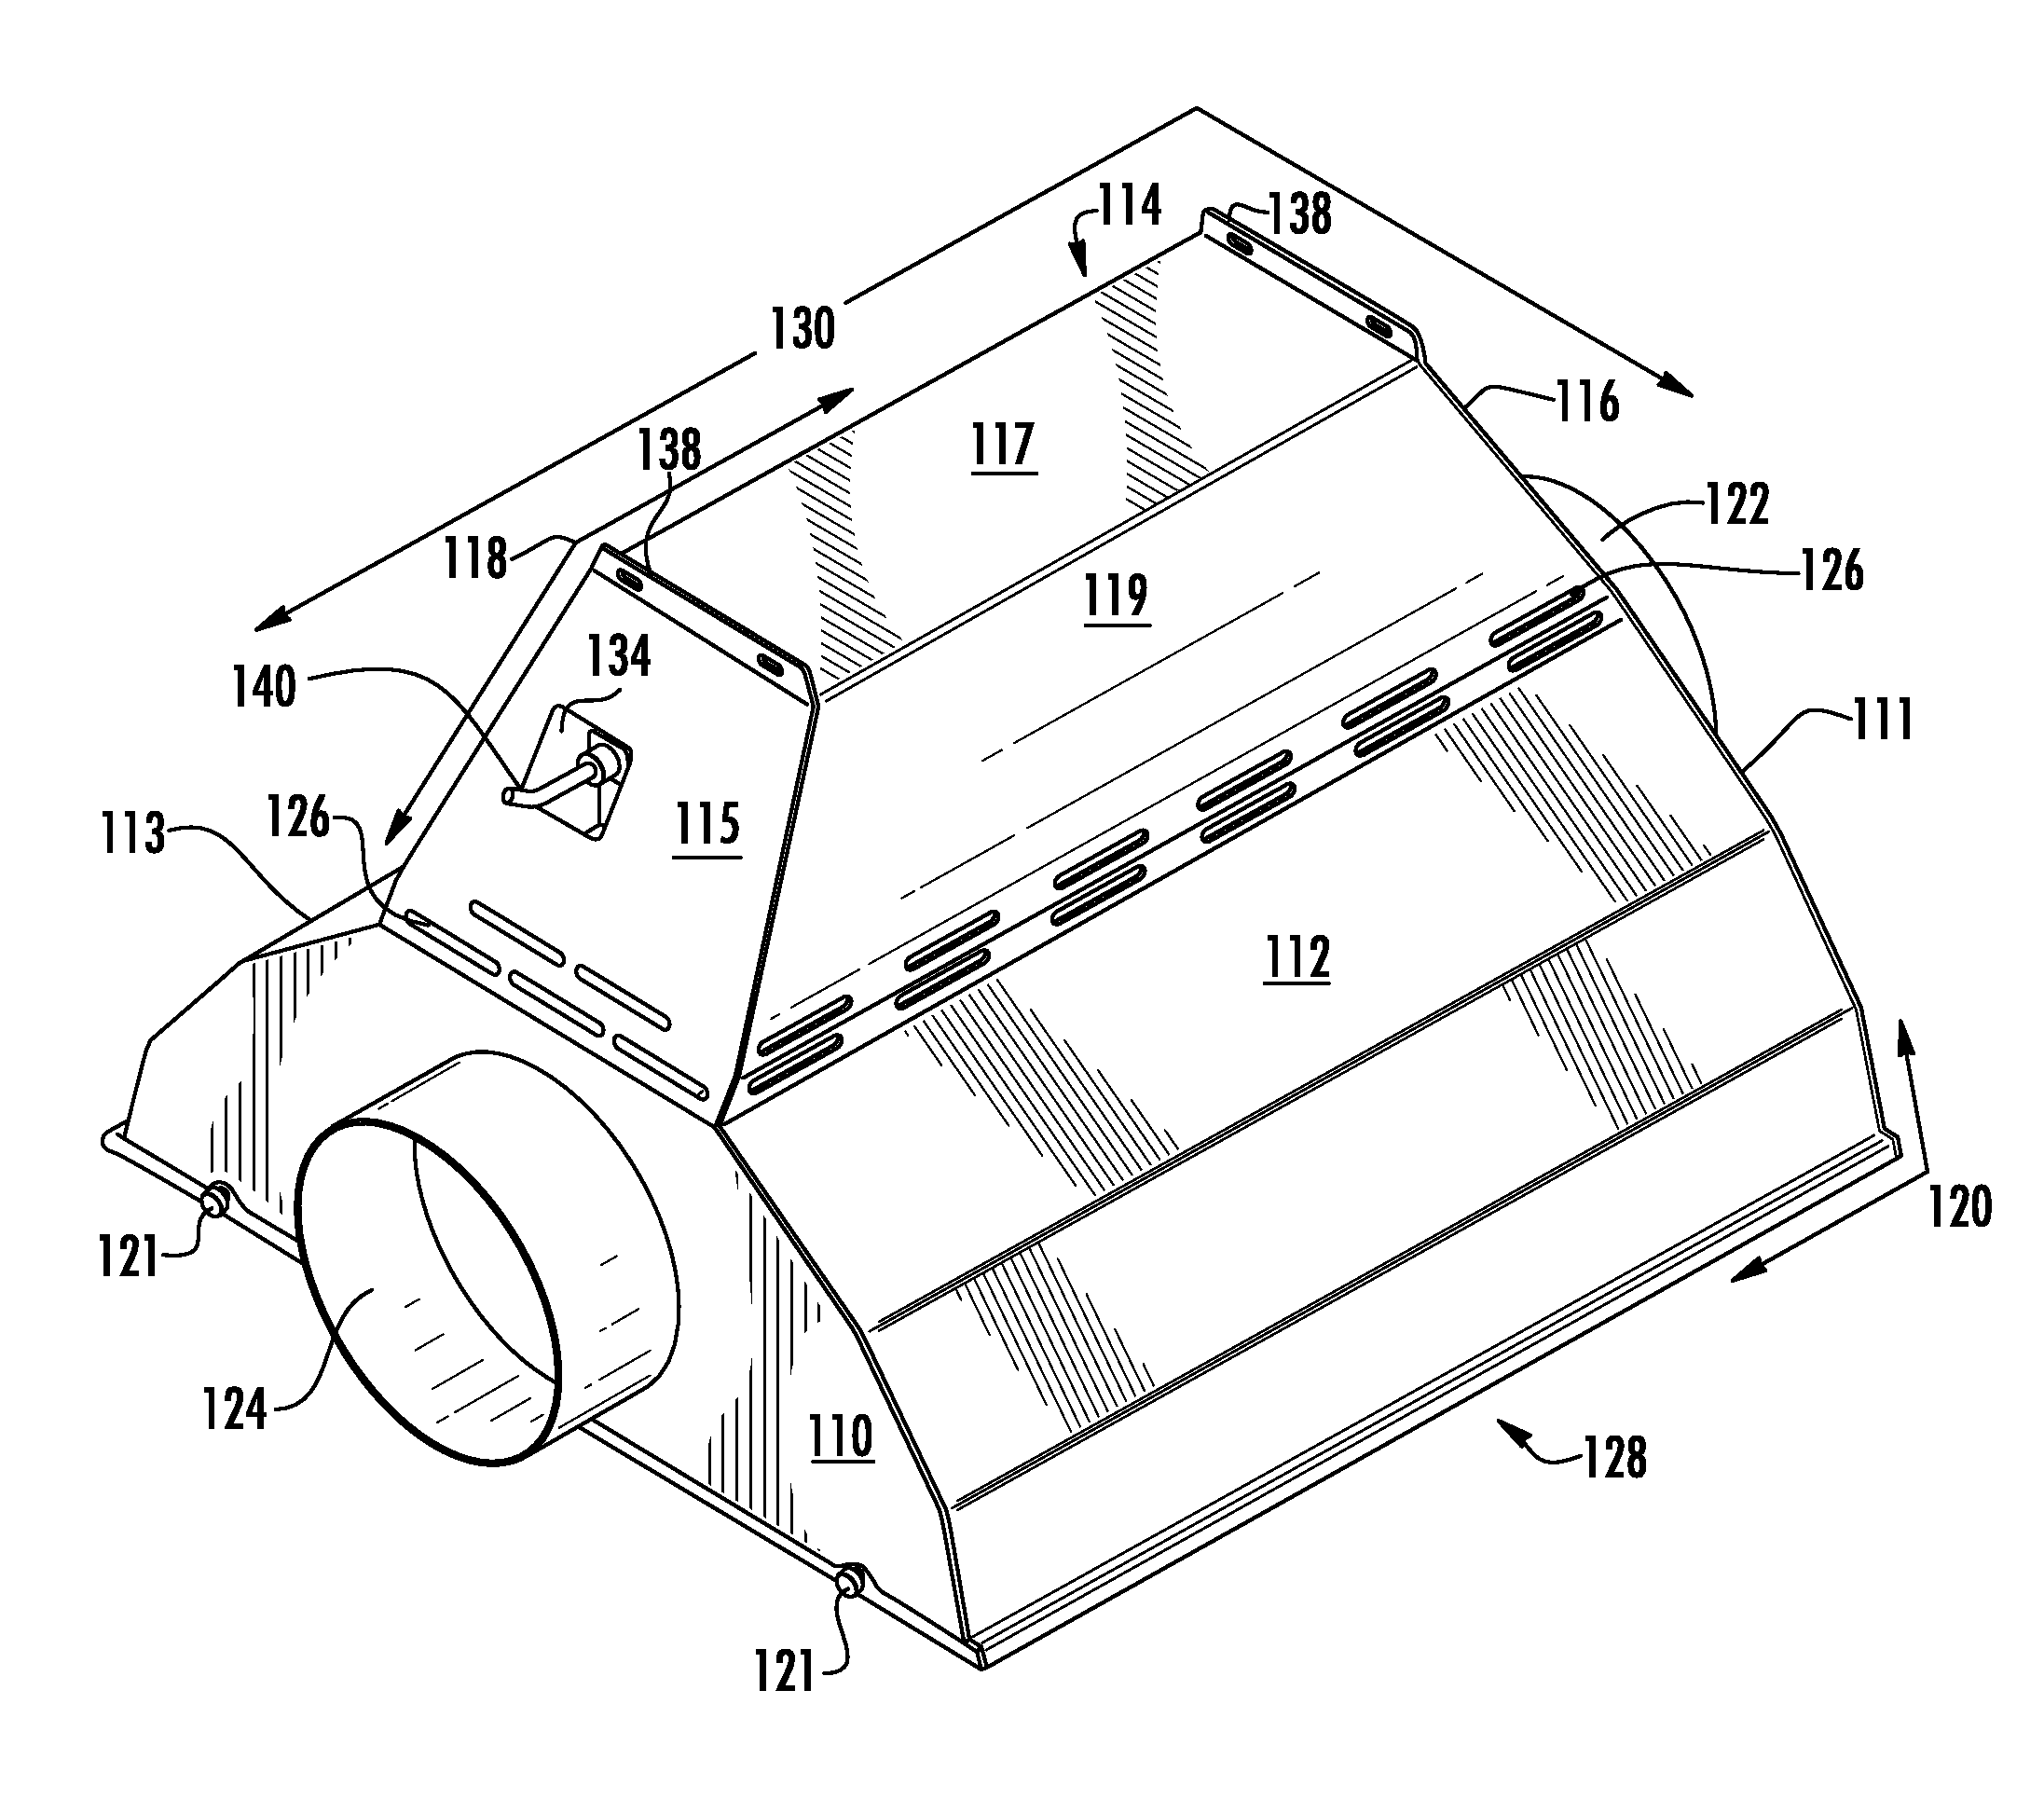 Horticulture Light Fixture Having Integrated Lamp and Ballast